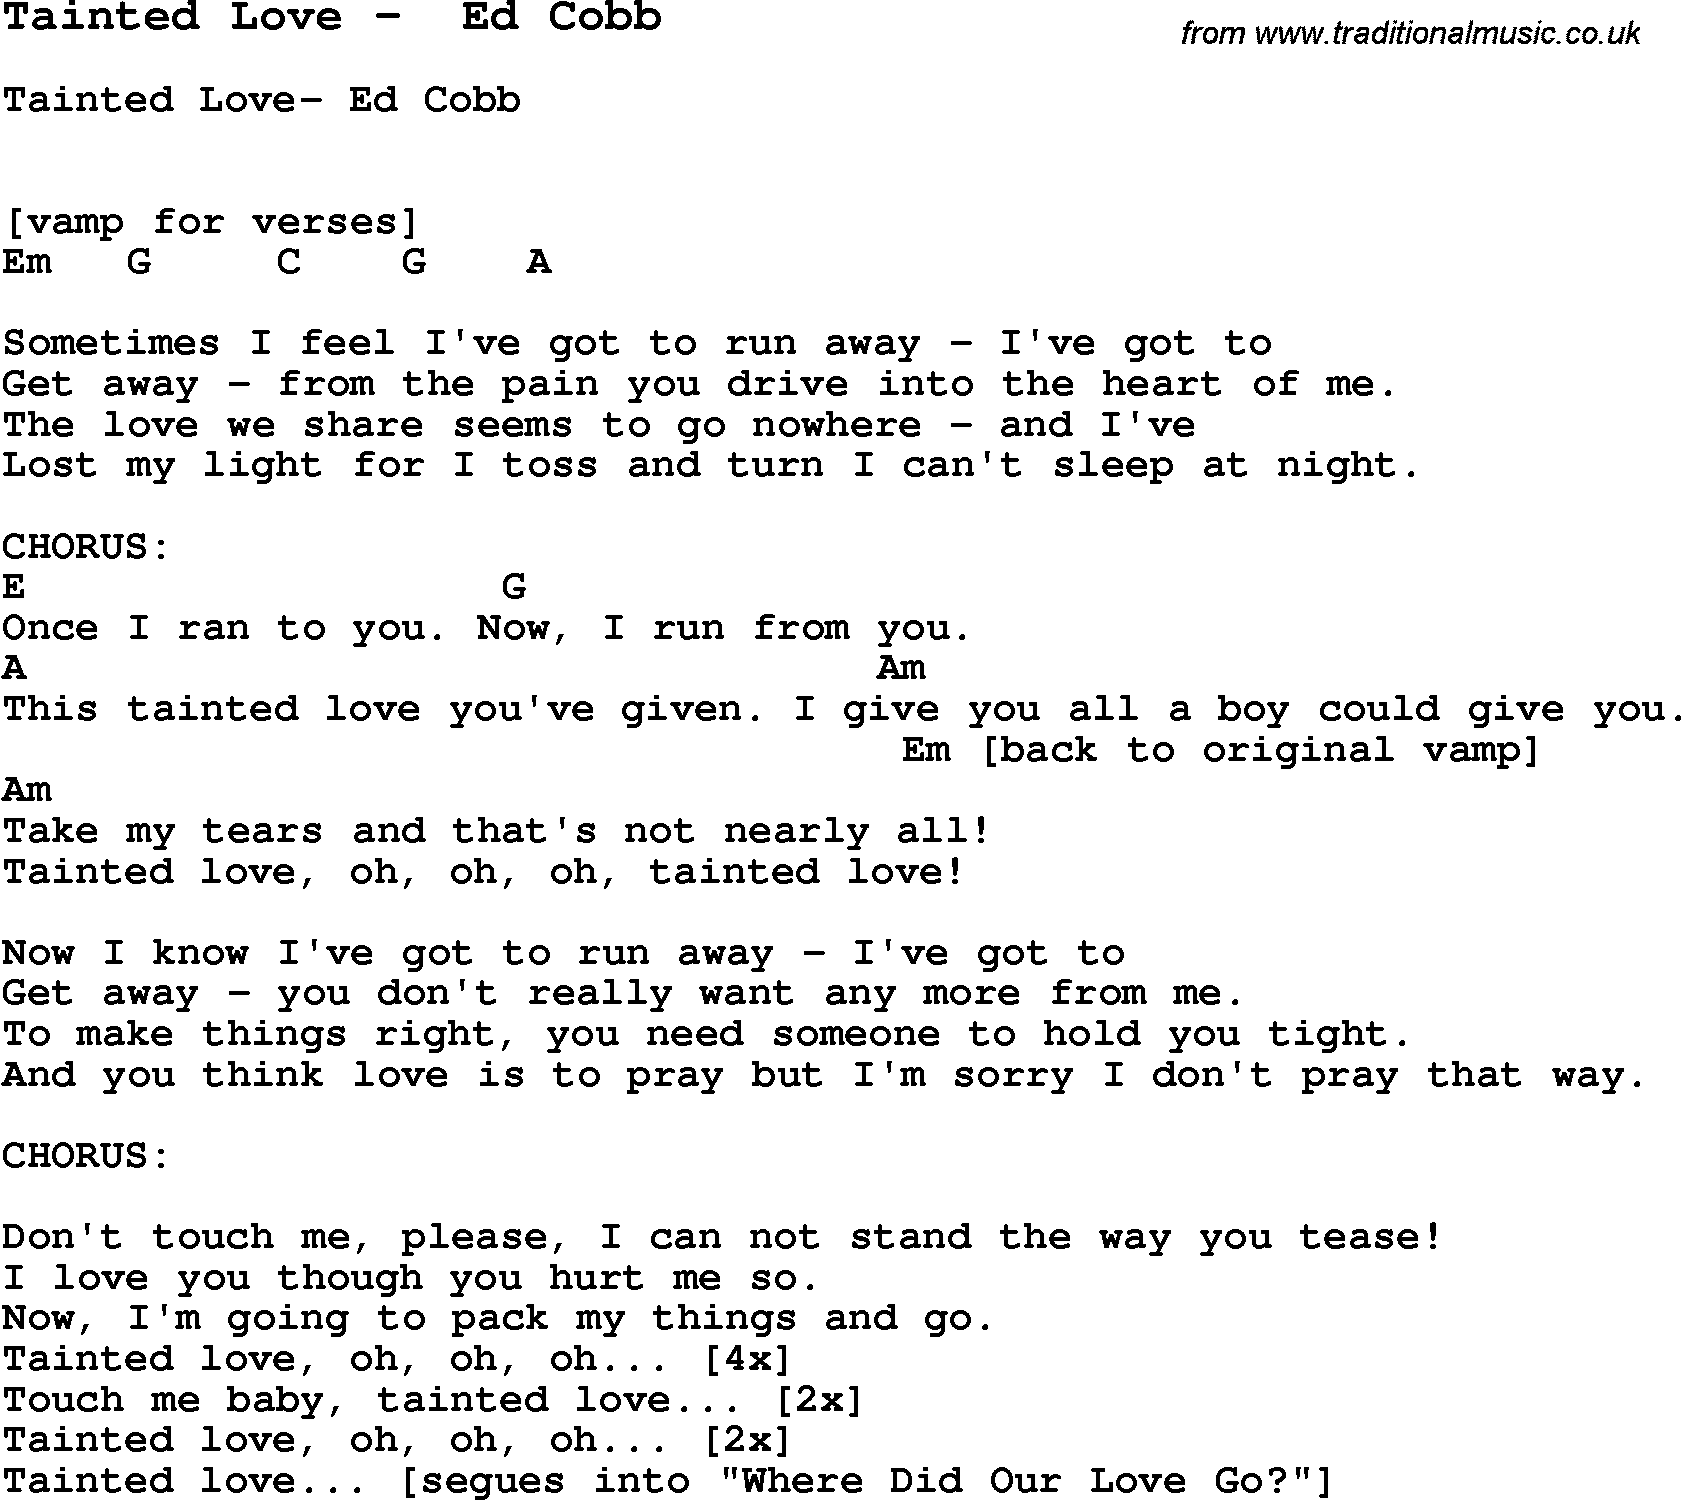 Song Tainted Love by  Ed Cobb, with lyrics for vocal performance and accompaniment chords for Ukulele, Guitar Banjo etc.